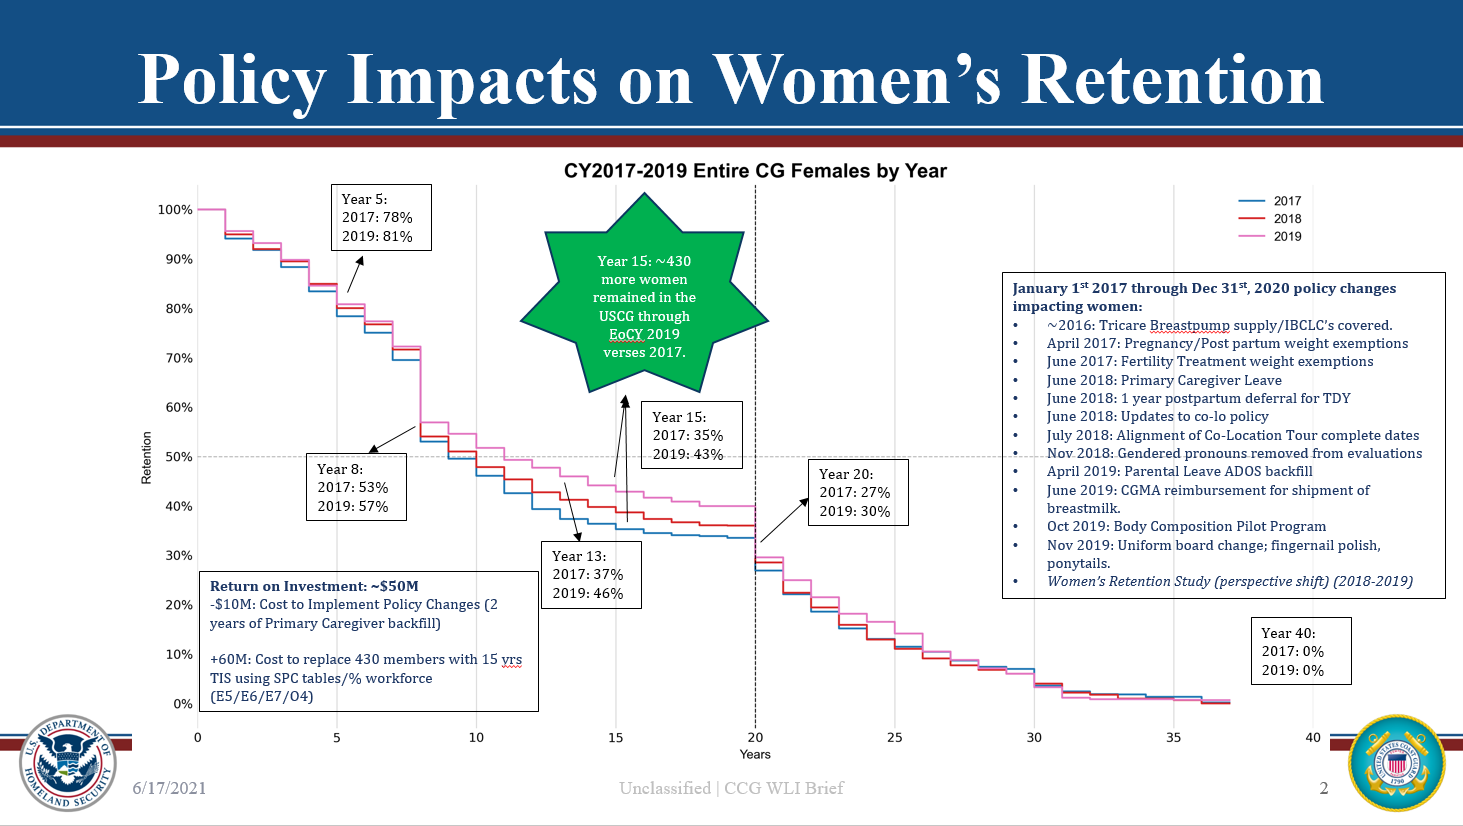 Policy impacts on women's retention